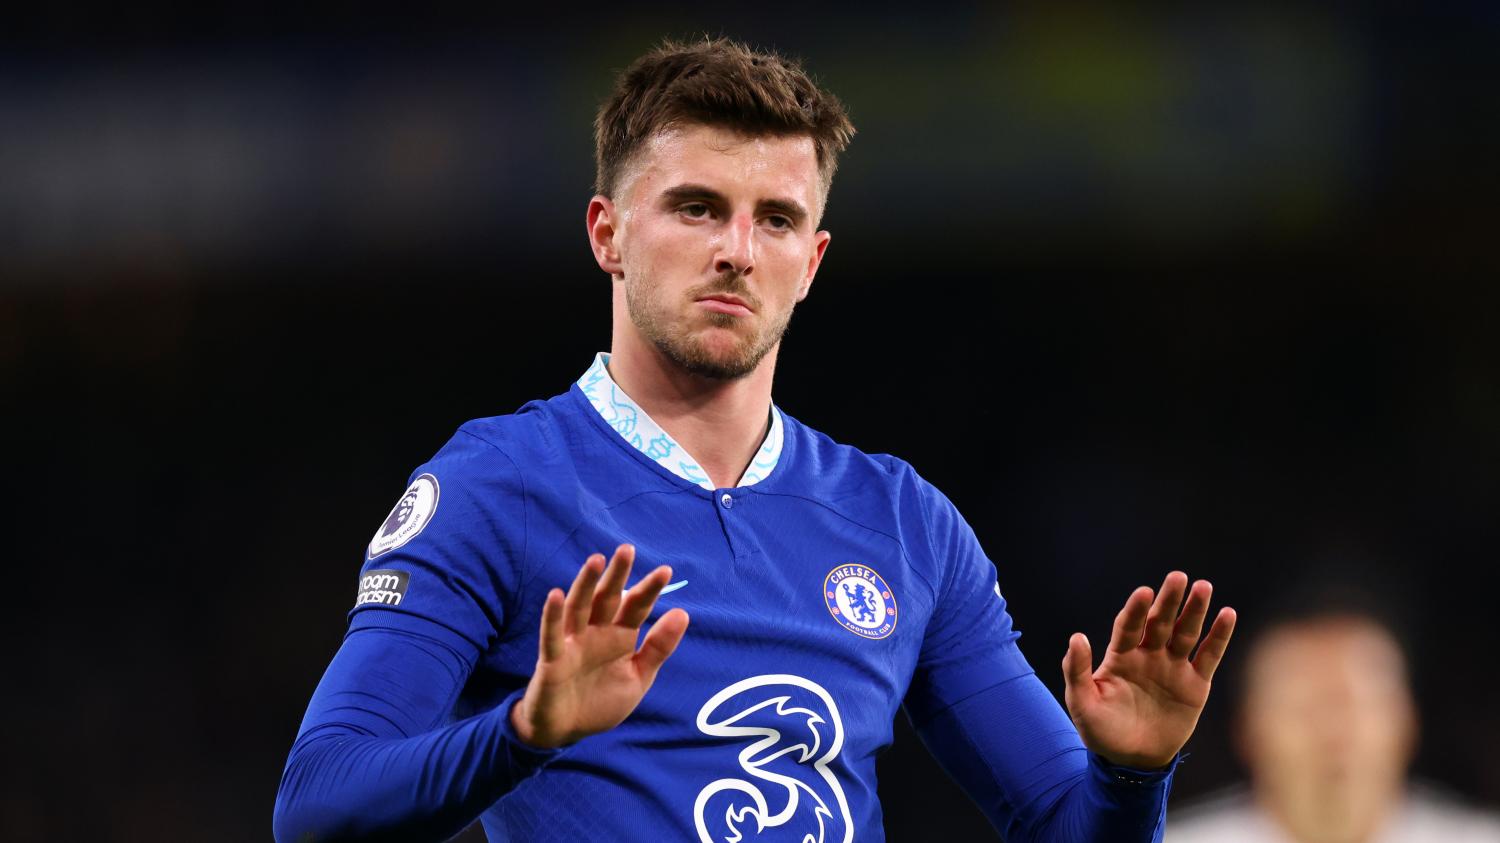 Chelsea could lose one of their own in Mason Mount in a perfect revenge story to Thomas Tuchel.